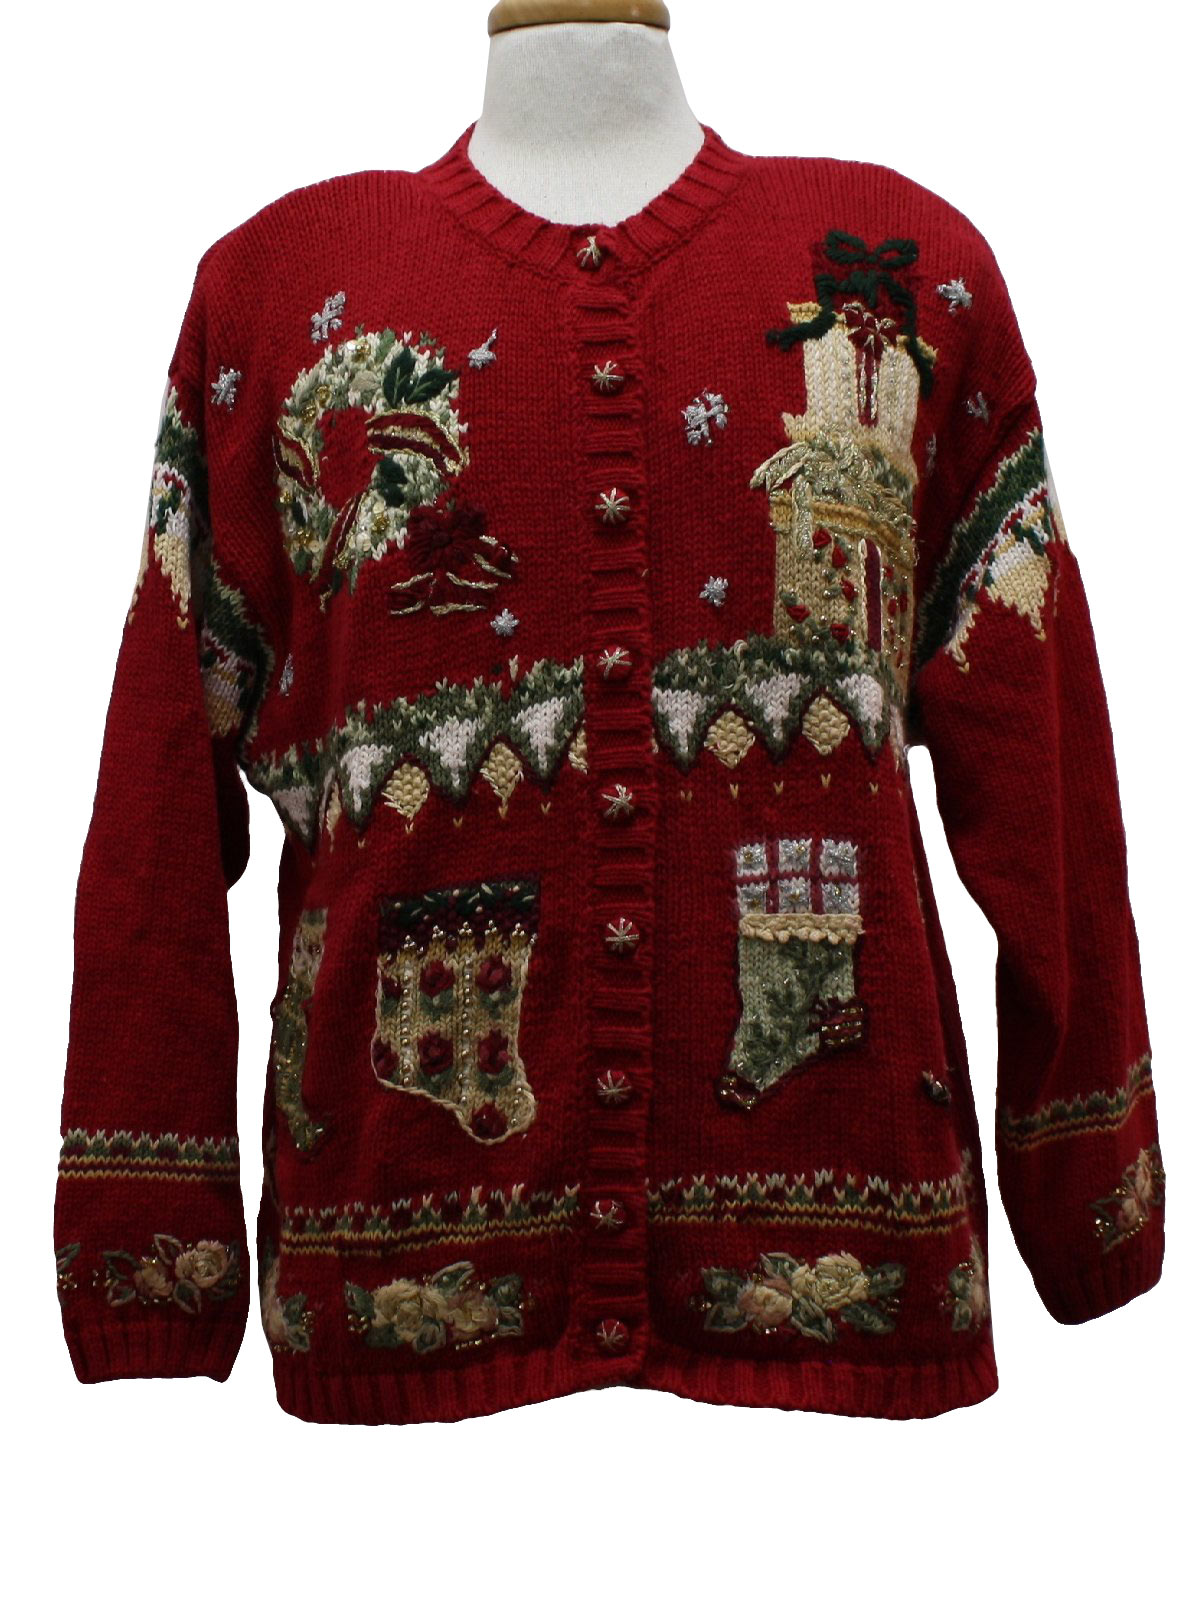 Womens Ugly Christmas Sweater : -Heirloom Collectibles- Womens red ...